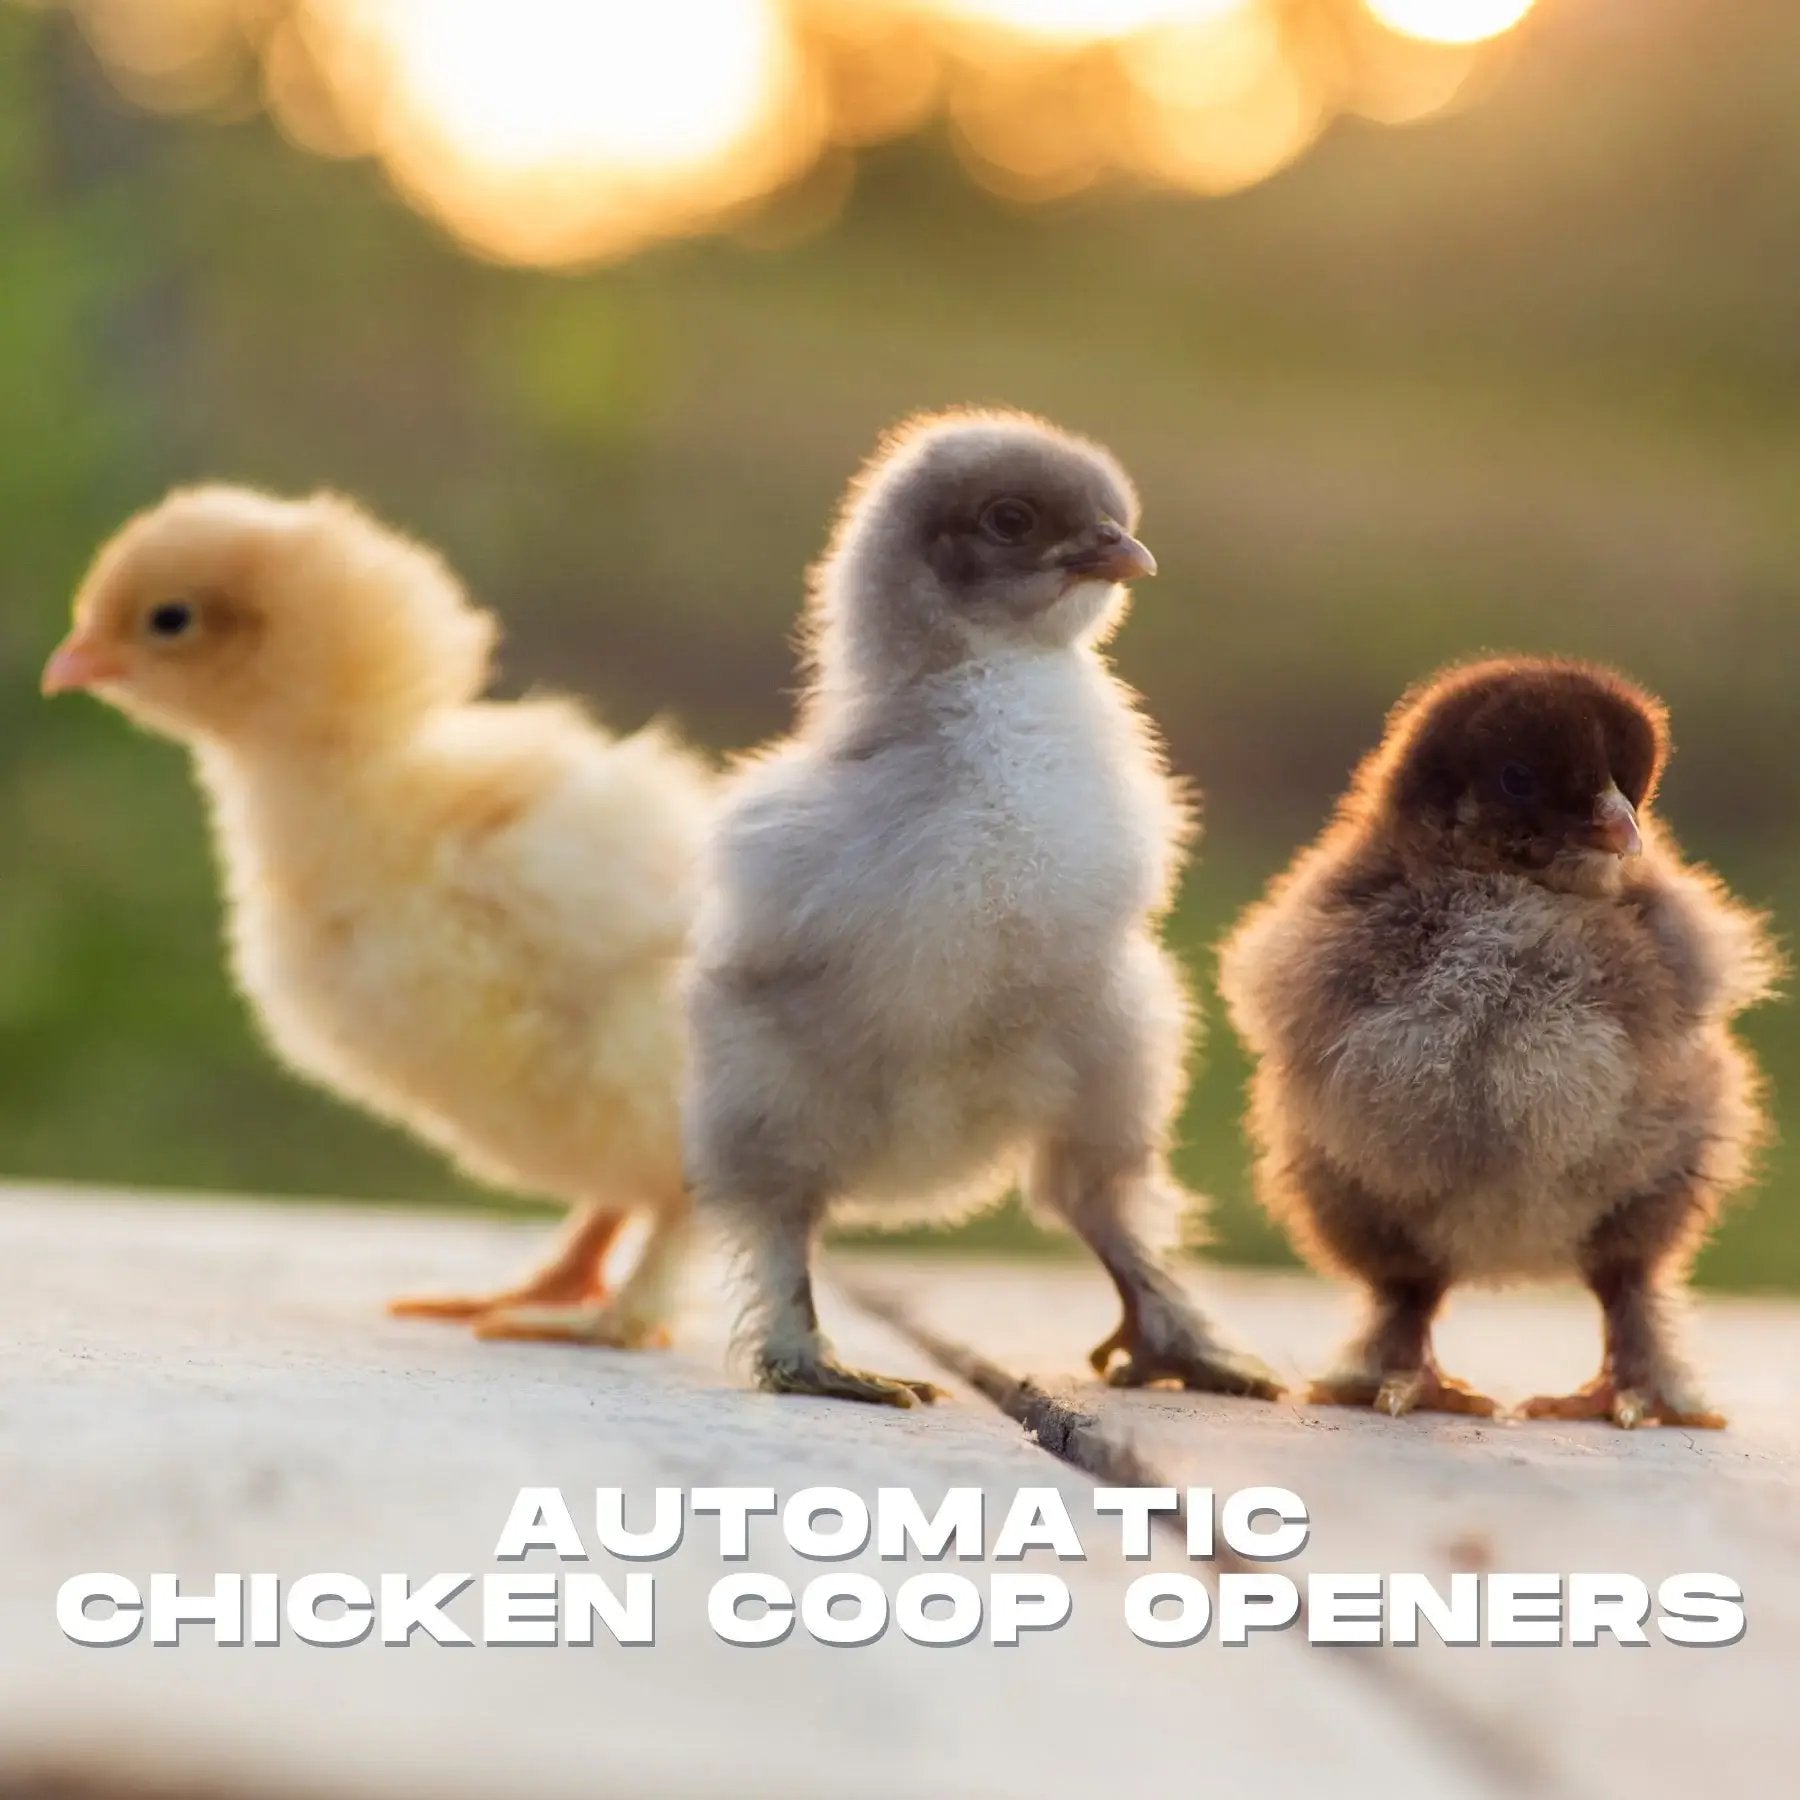 Automatic Chicken Coop door openers on Sale for chick days. Works on all coop doors 16"-30" wide. You also can use solar for a solar chicken coop door opener.